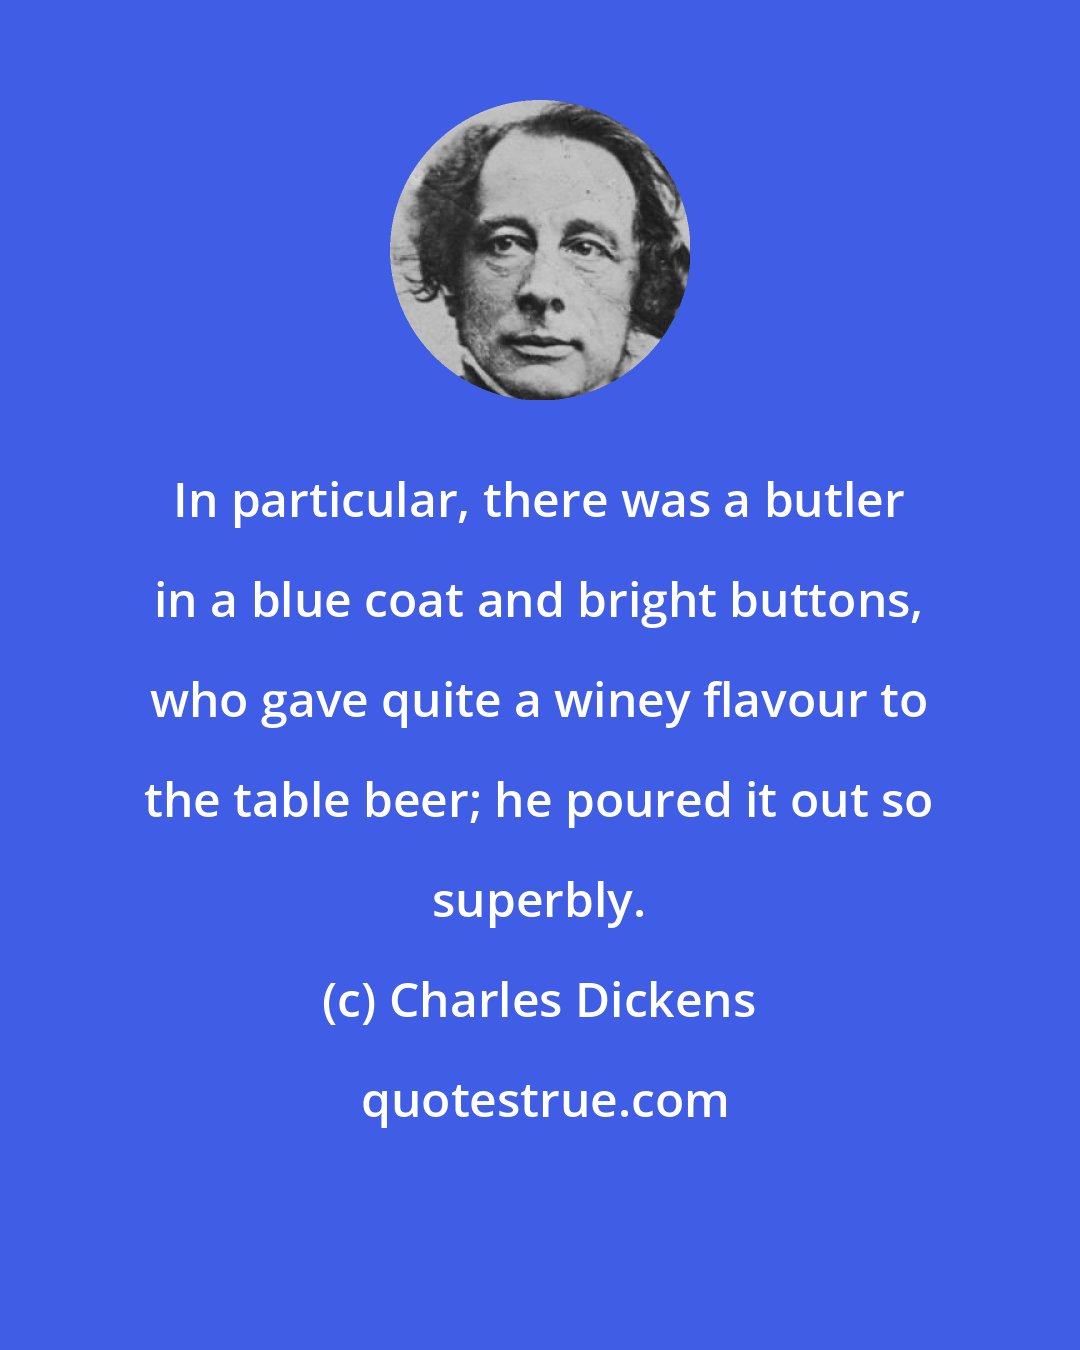 Charles Dickens: In particular, there was a butler in a blue coat and bright buttons, who gave quite a winey flavour to the table beer; he poured it out so superbly.